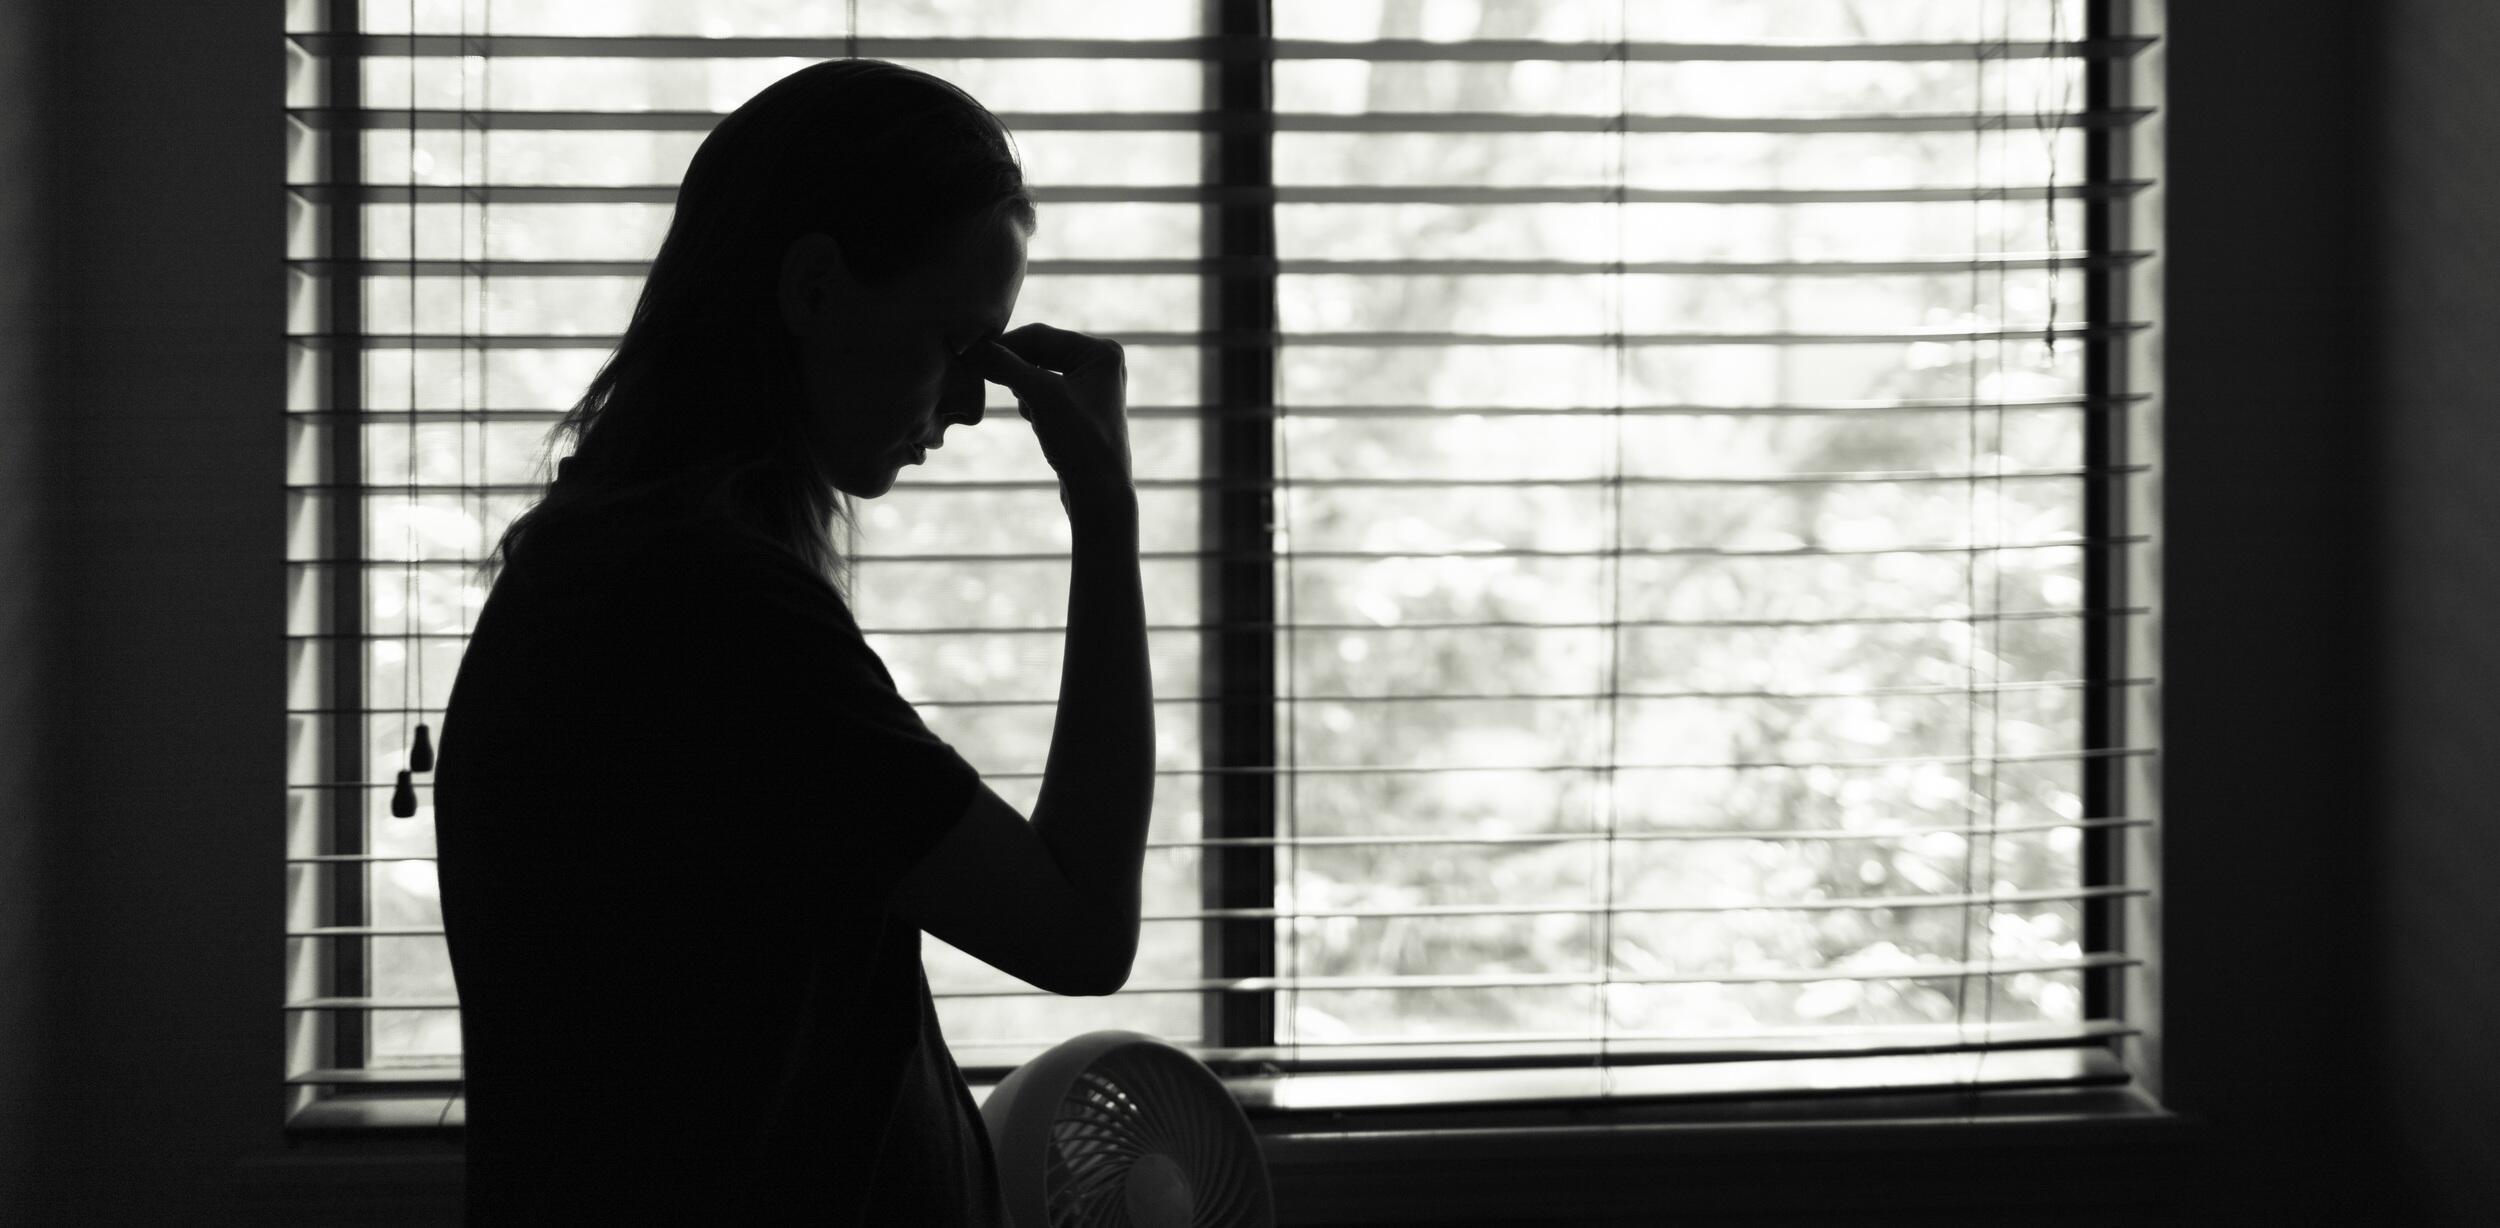 The silhouette woman pinching the brow of her nose in front of a window